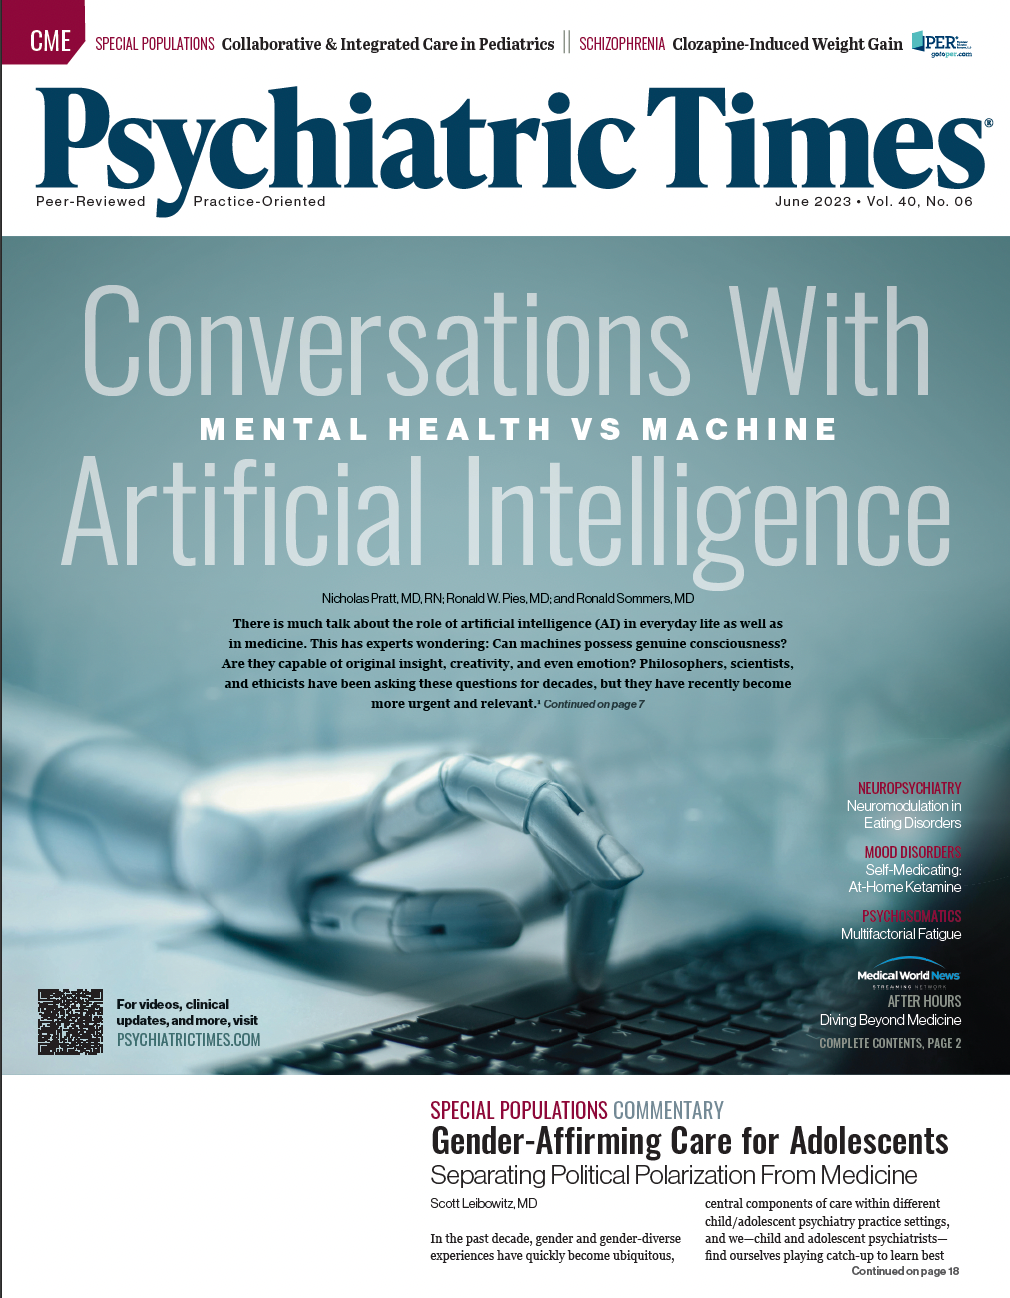 Artificial Intelligence and Psychiatry One Year Later